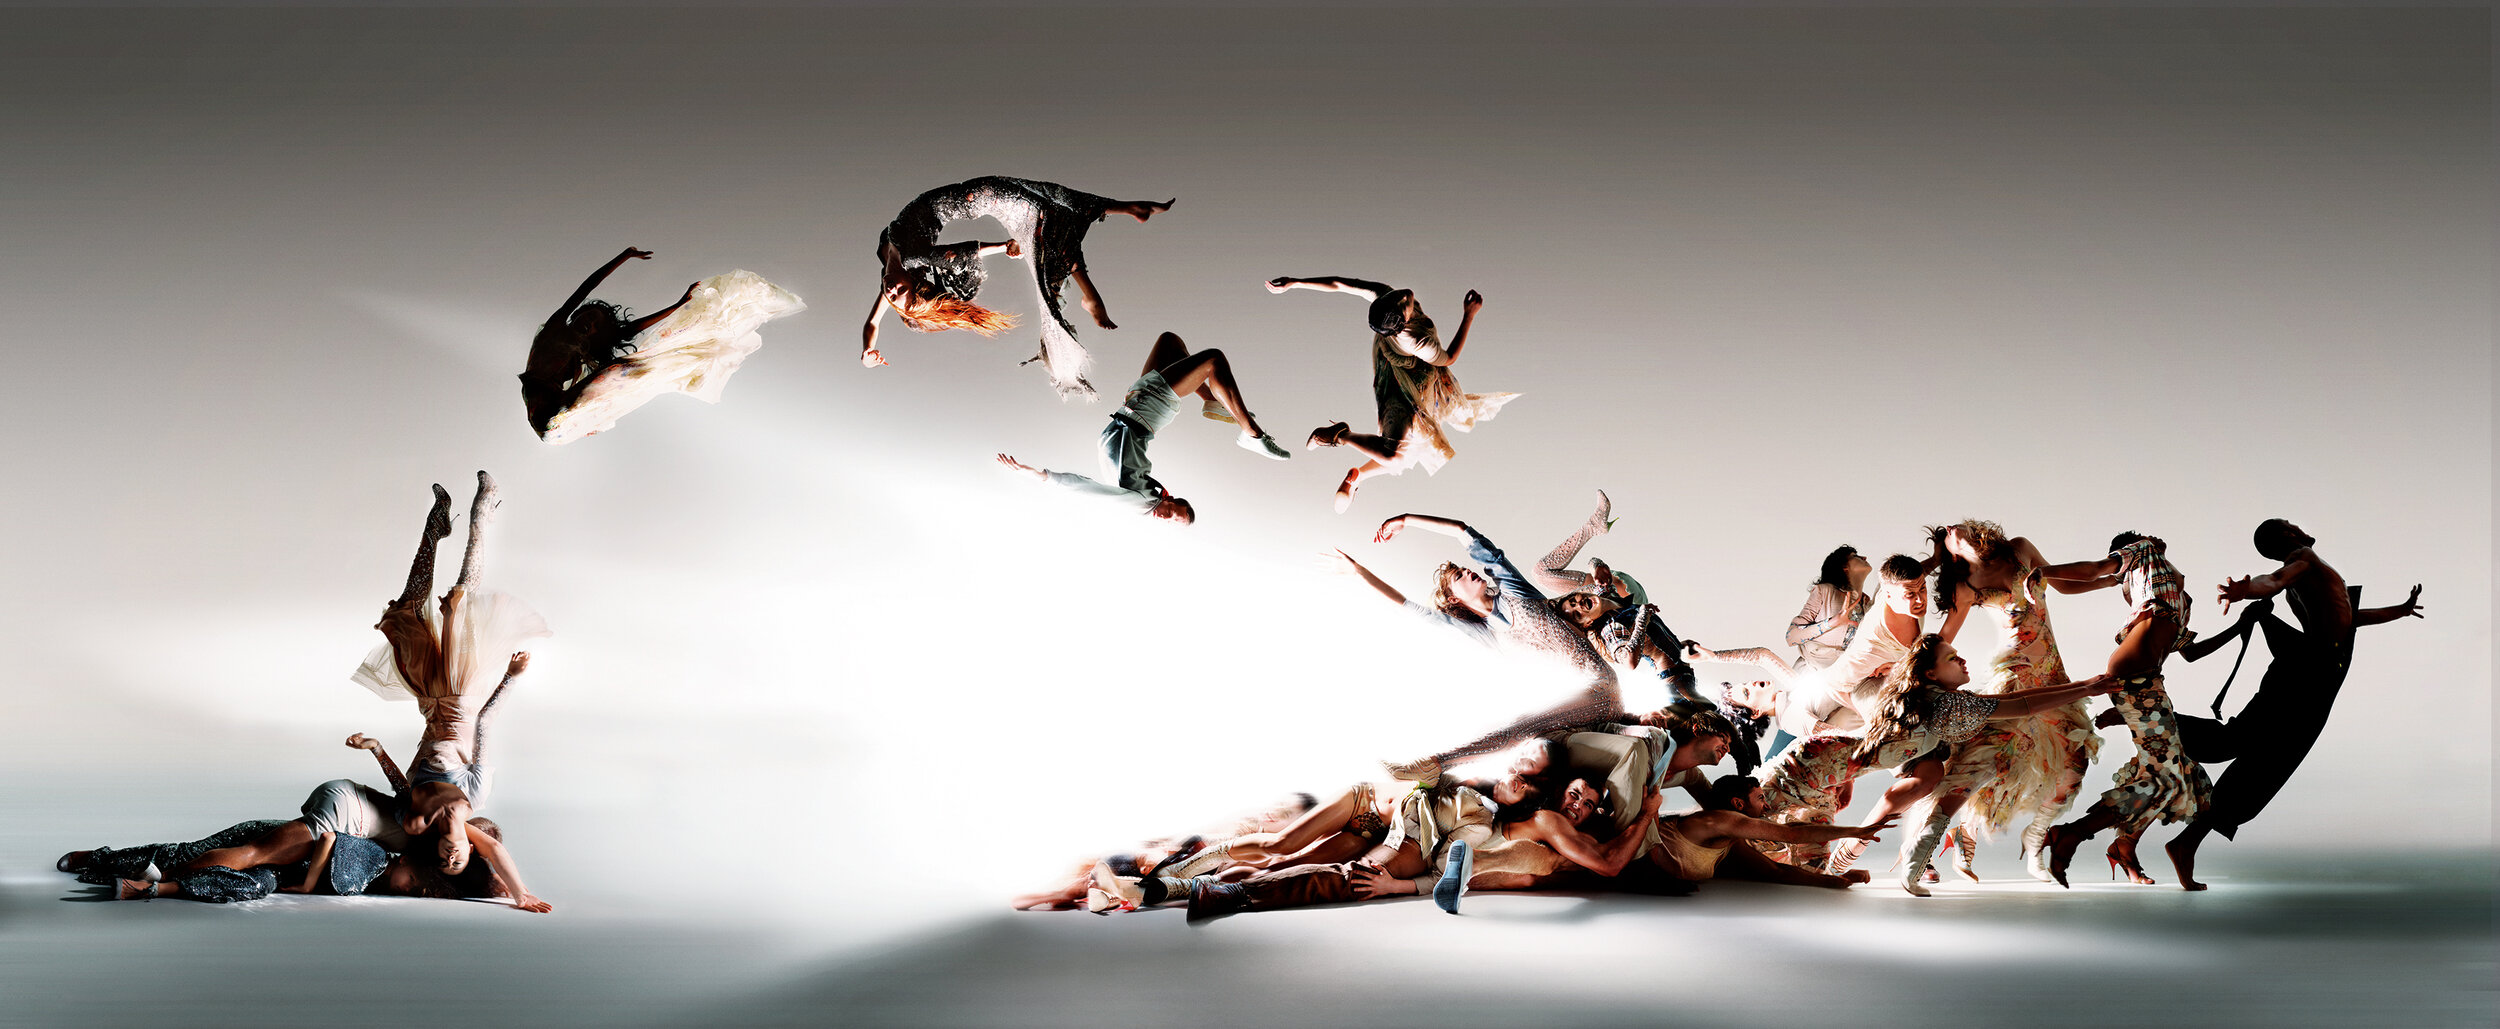 Nick Knight — Daily Excerpts New Posts